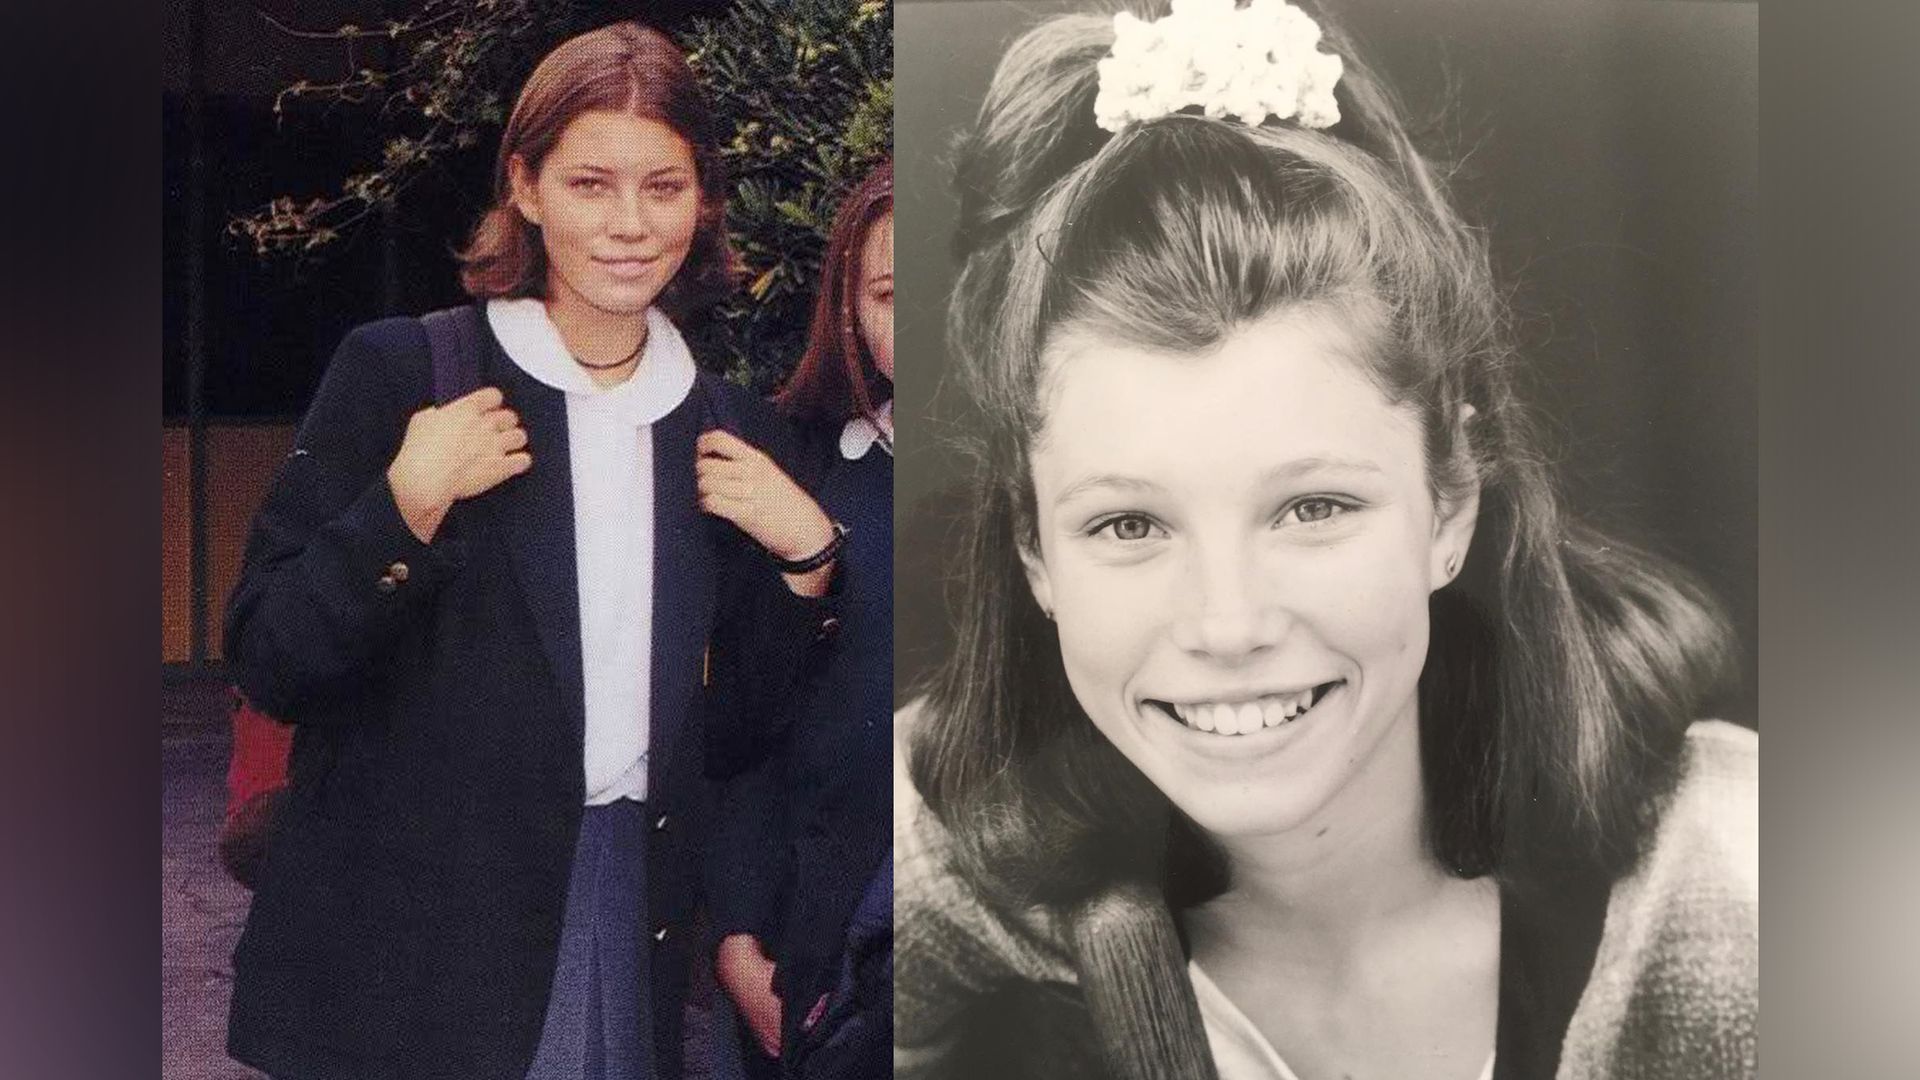 Jessica Biel in her youth